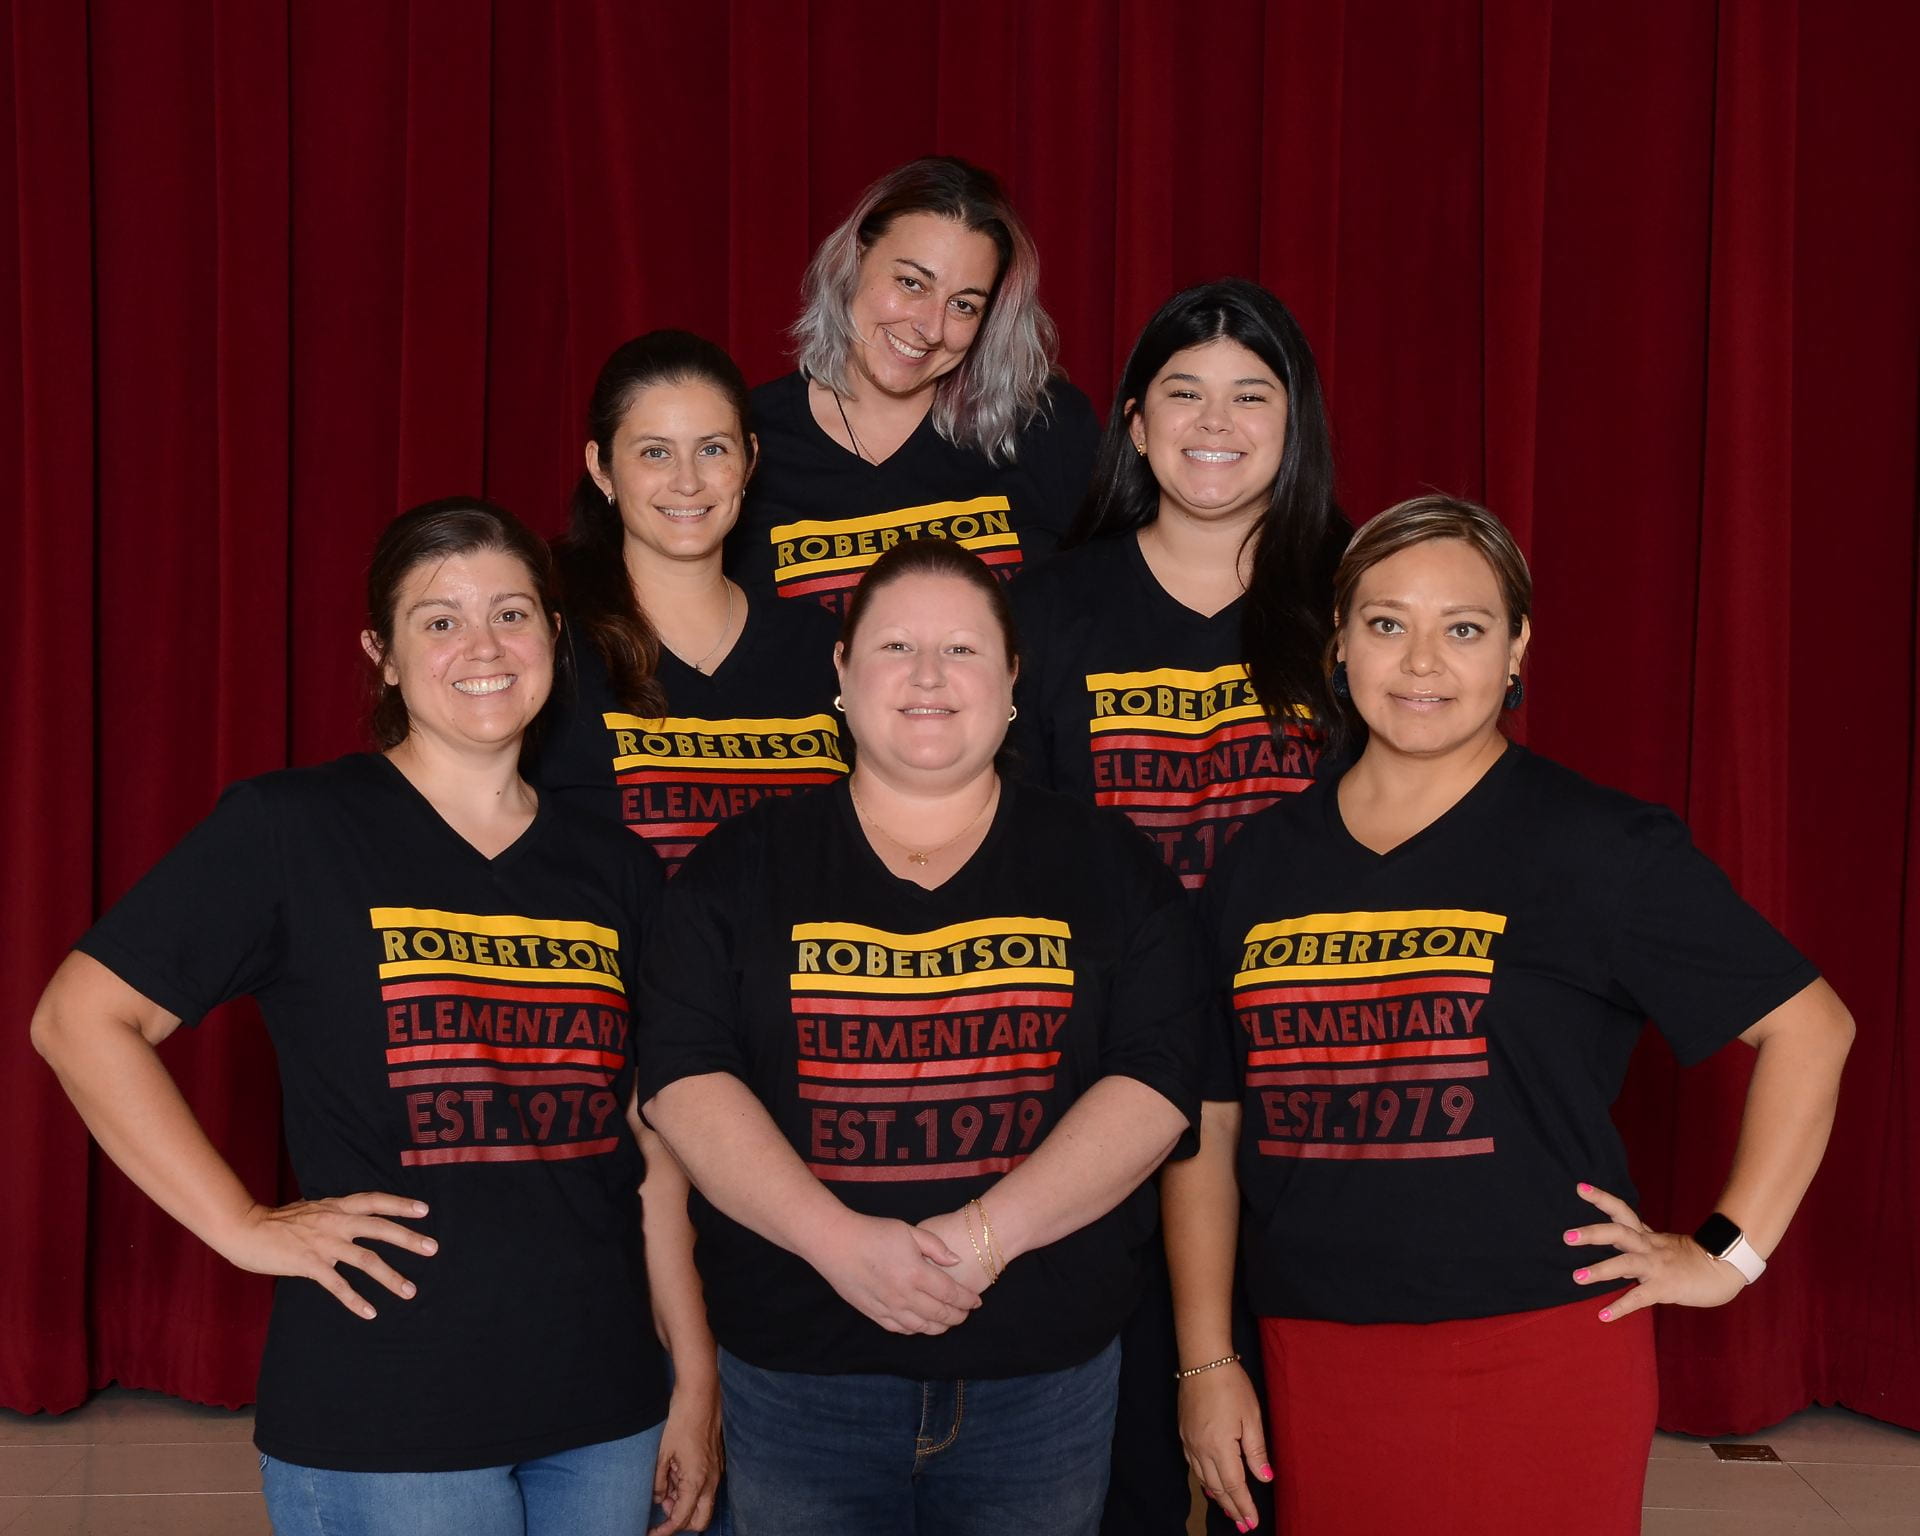 Six staff members wearing matching school shirts, stand in front of a dark background